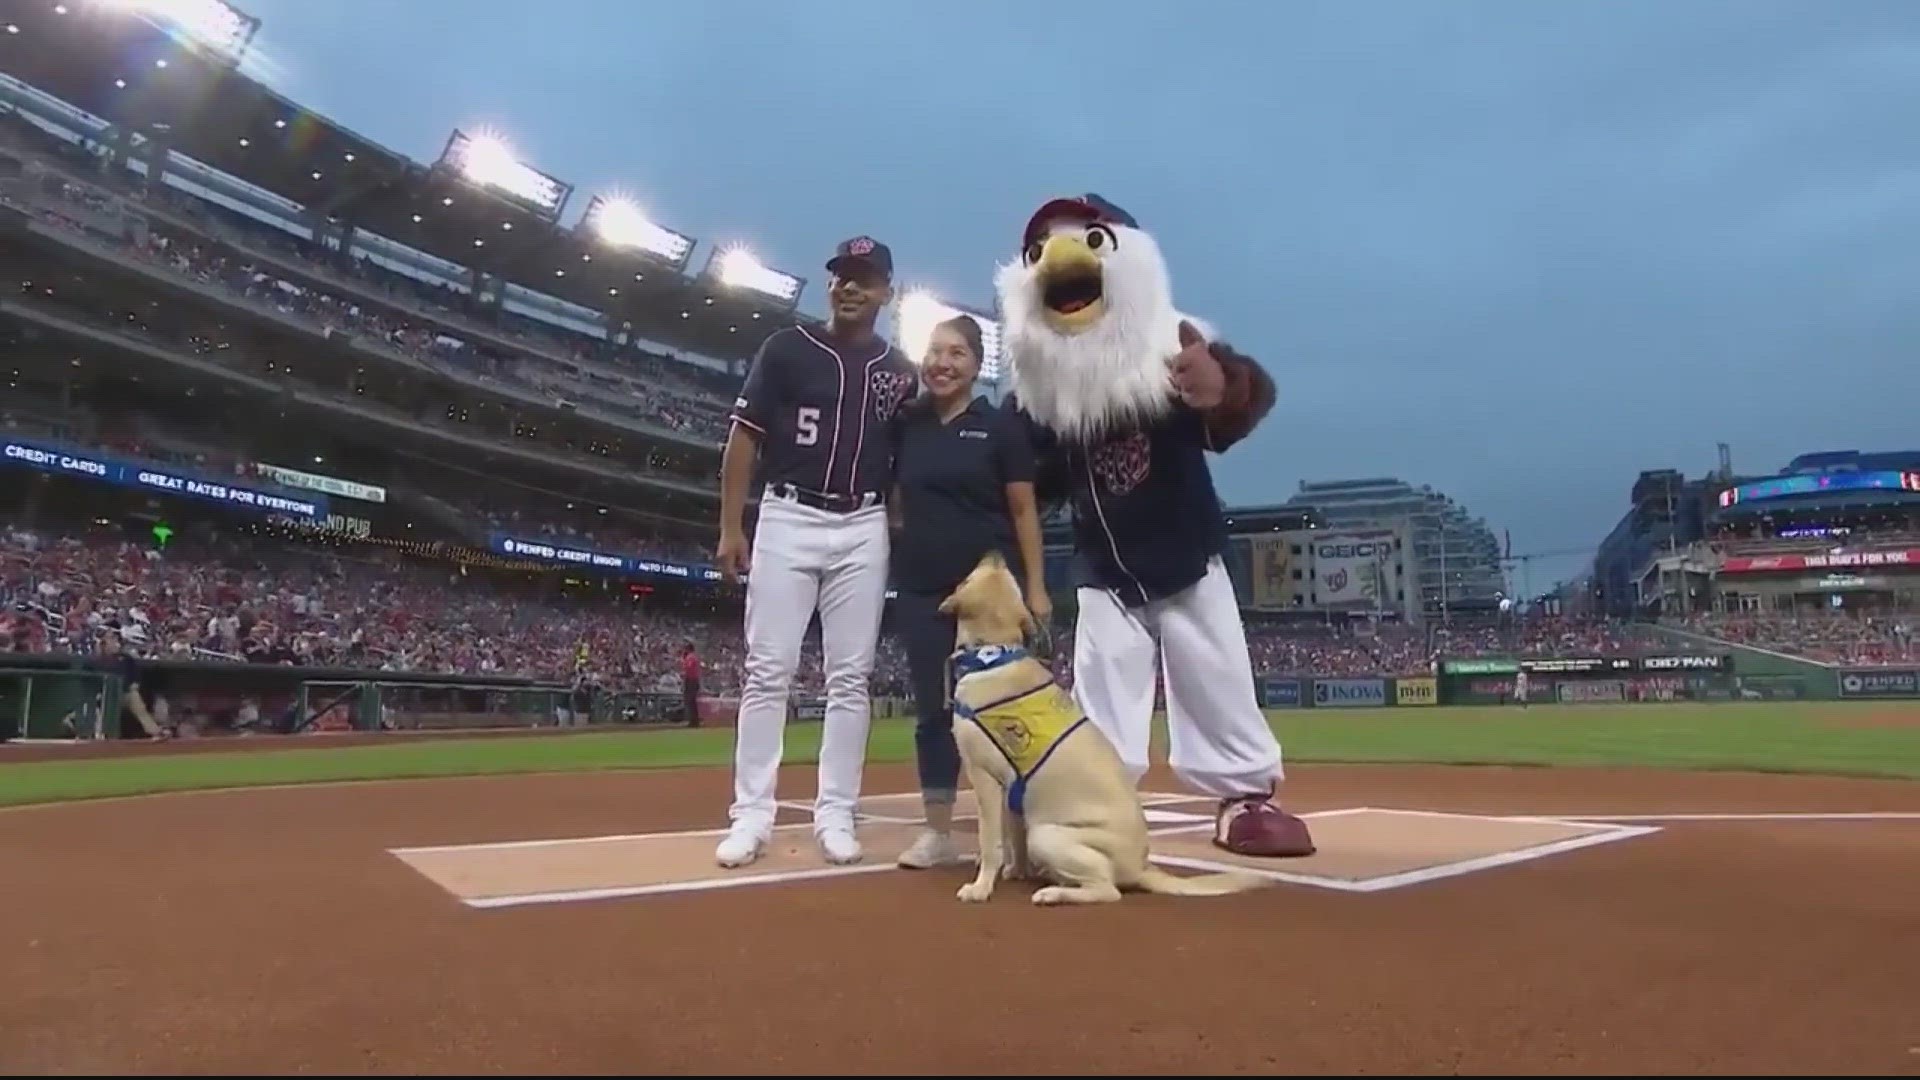 The Nats are hosting Pups in the Park tonight against the New York Mets.